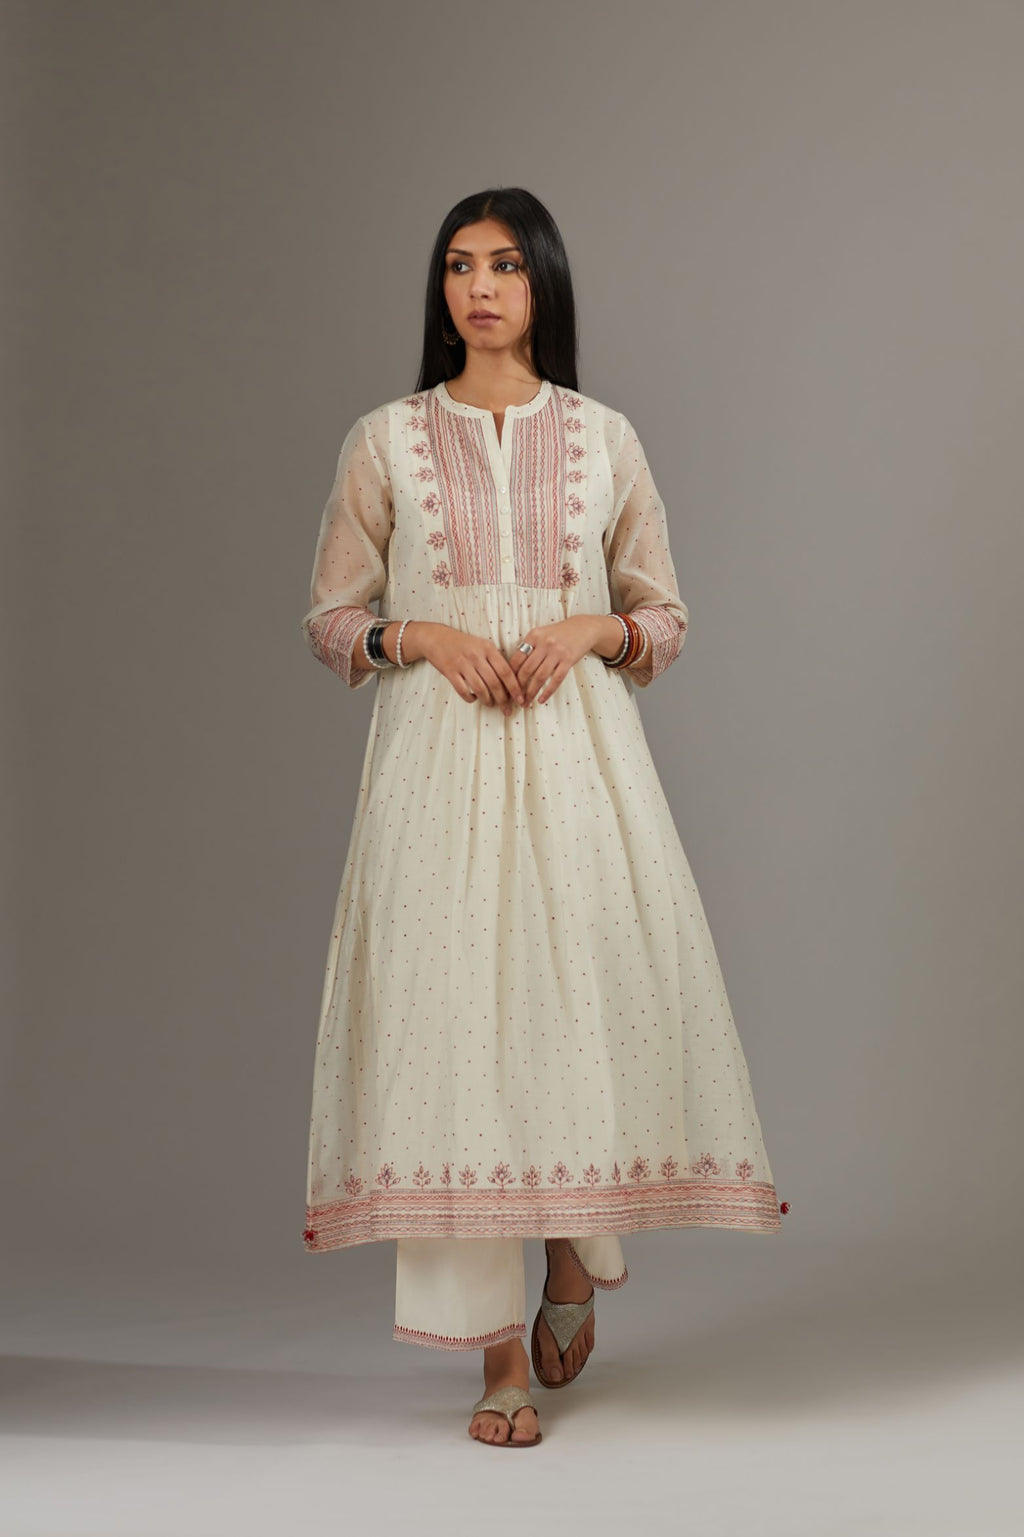 Hand block printed kurta set  dress with quilted, embroidered yoke with fine gathers.